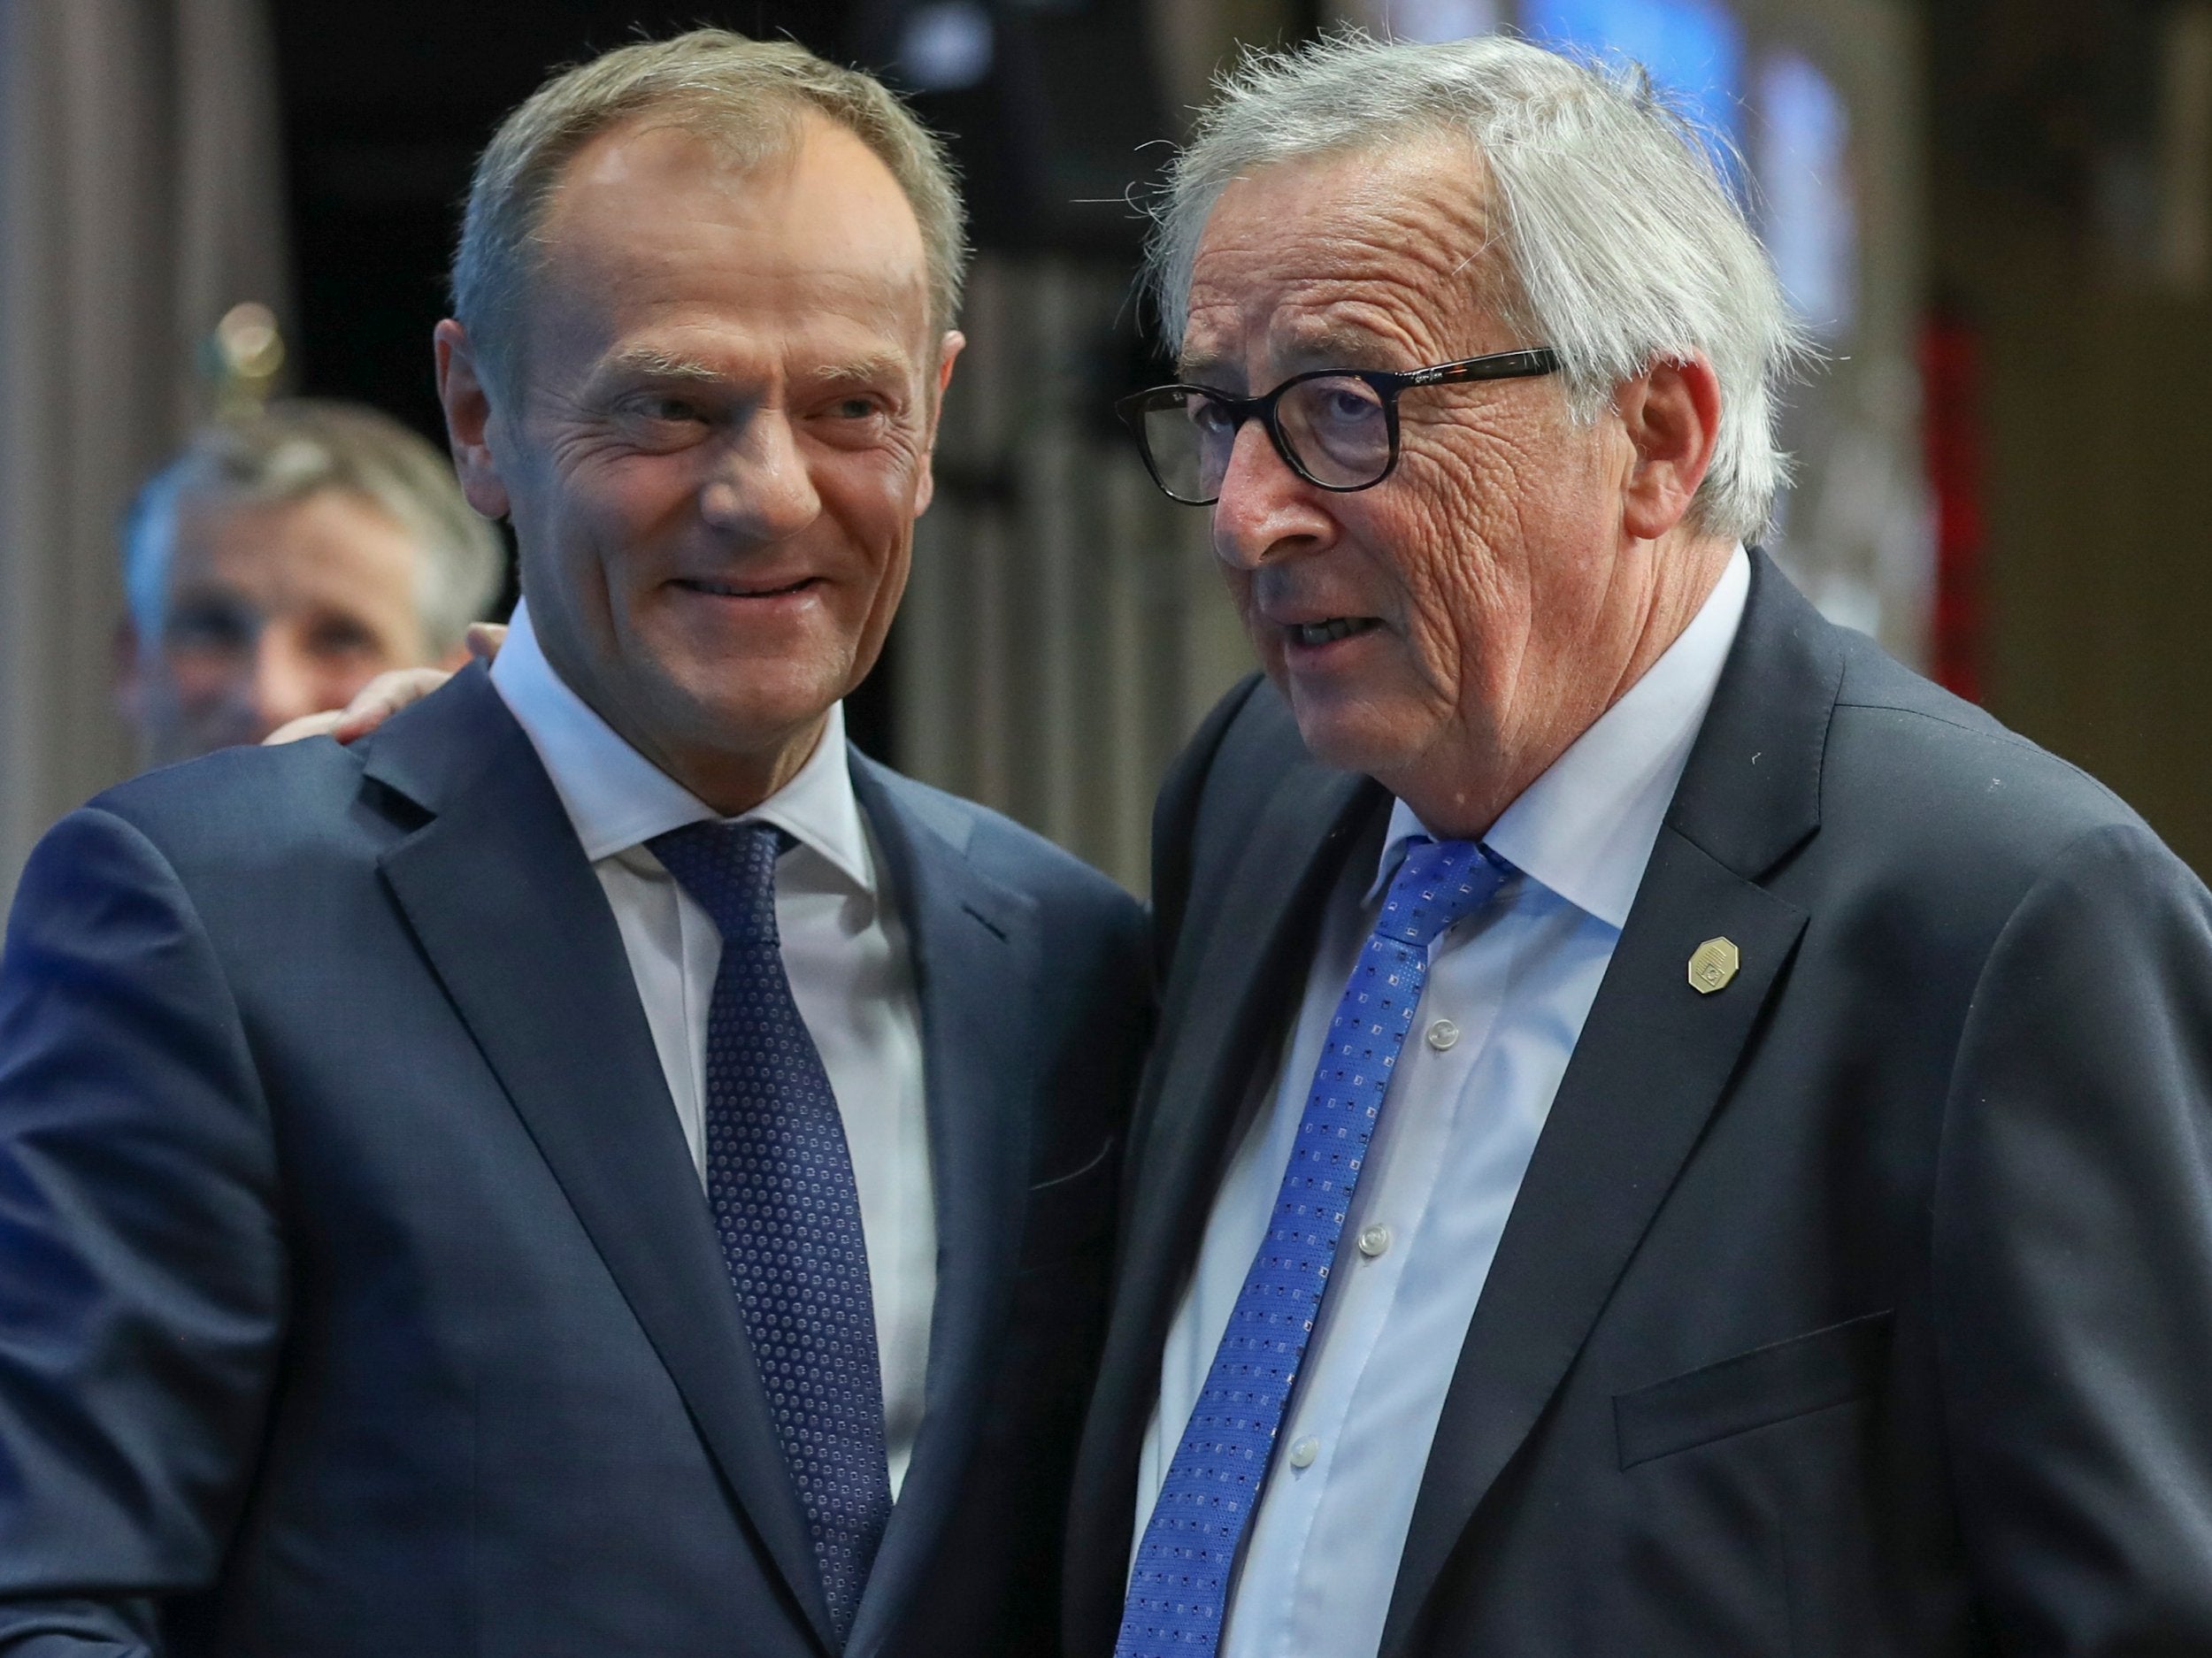 European unity over Brexit has been little tested